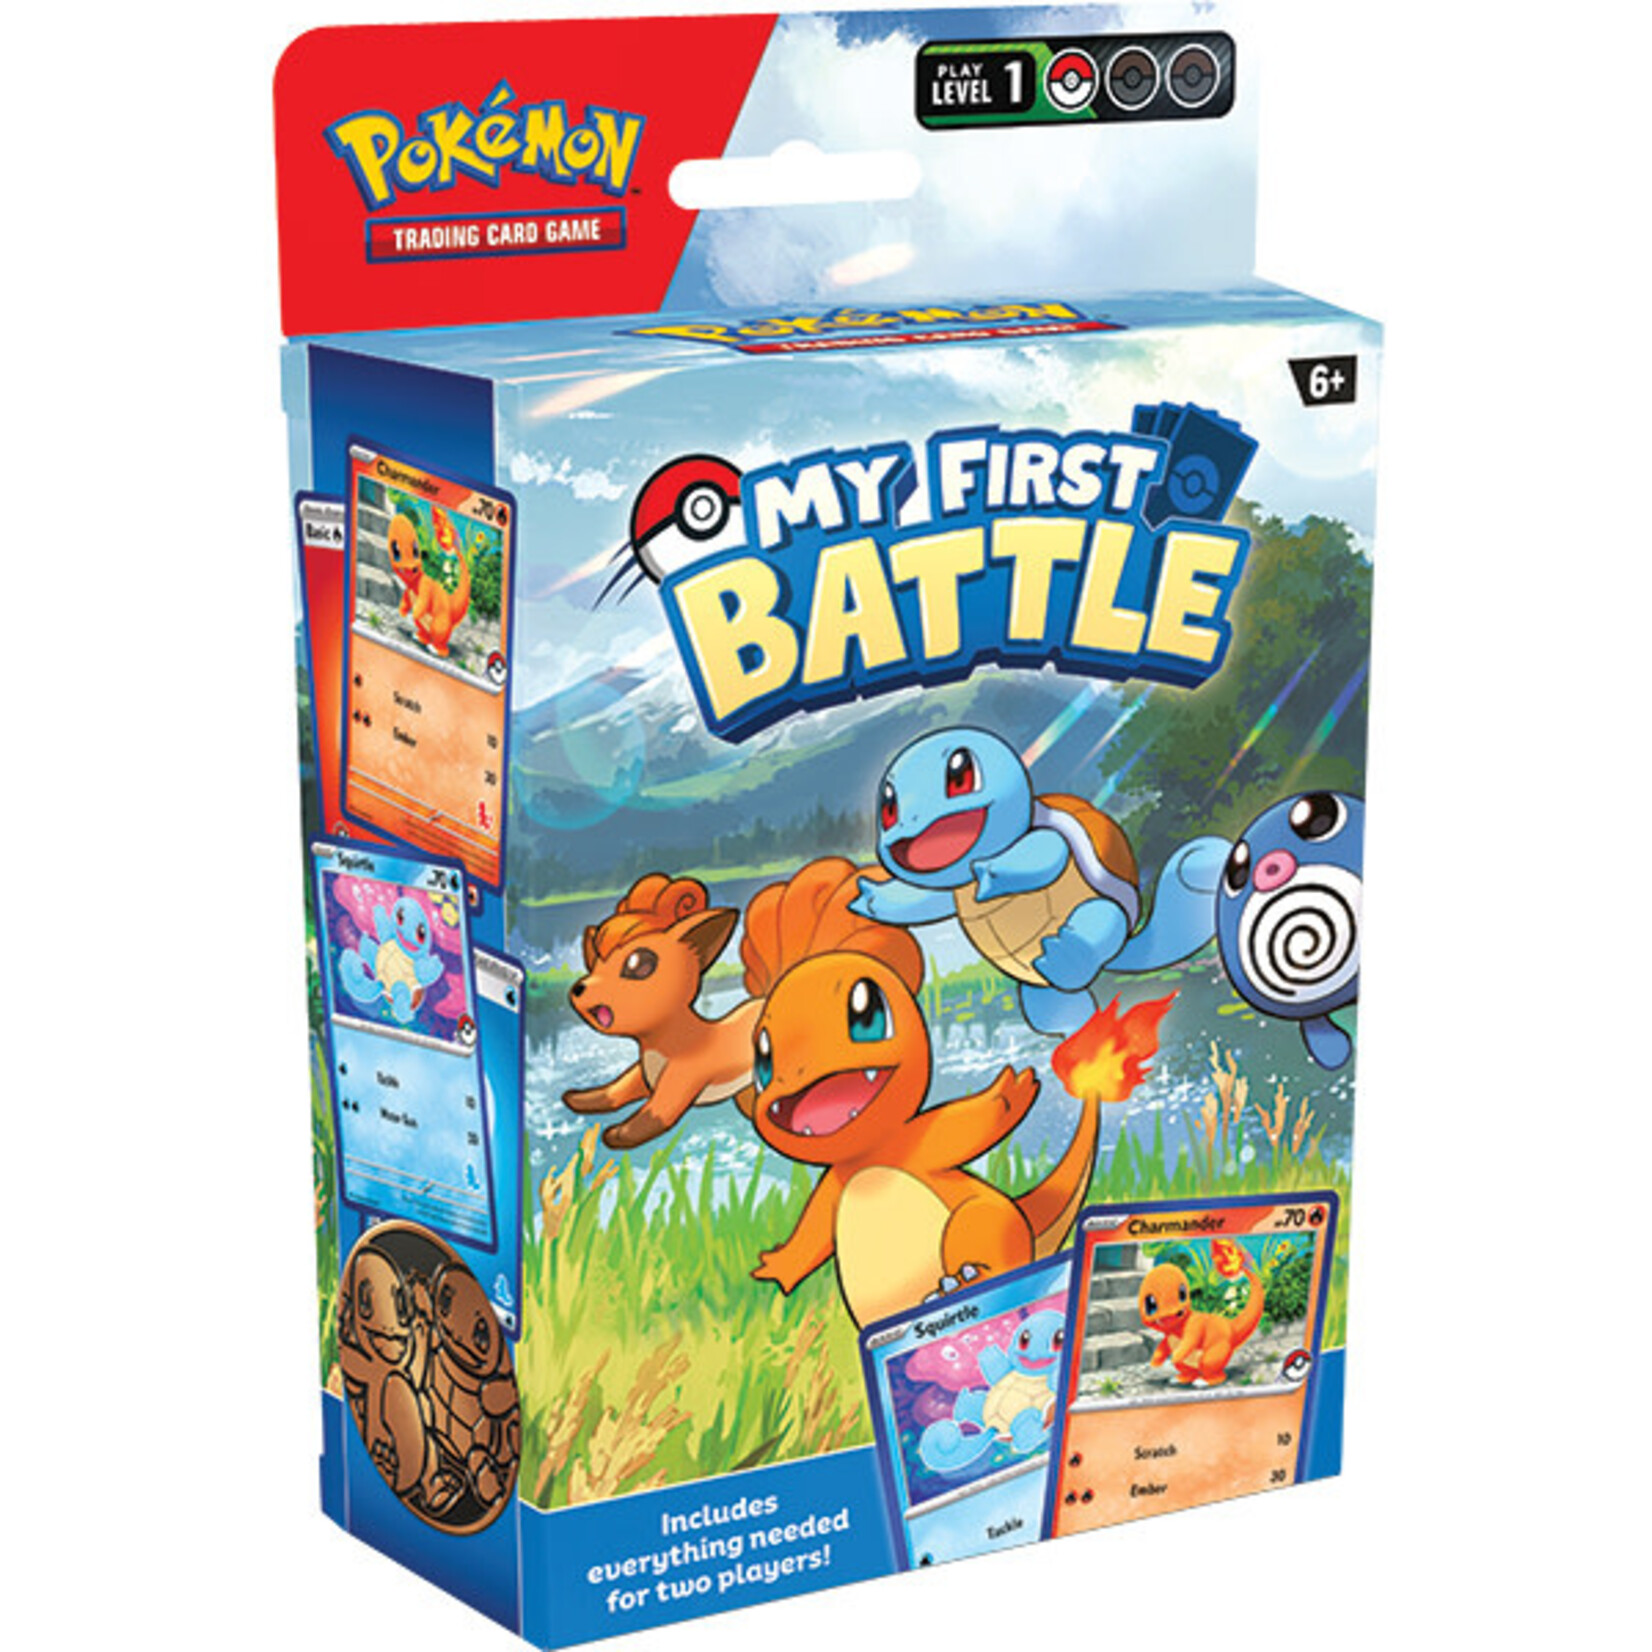 Pokémon Pokémon Trading Card Game: My First Battle Box (Squirtle and Charmander)